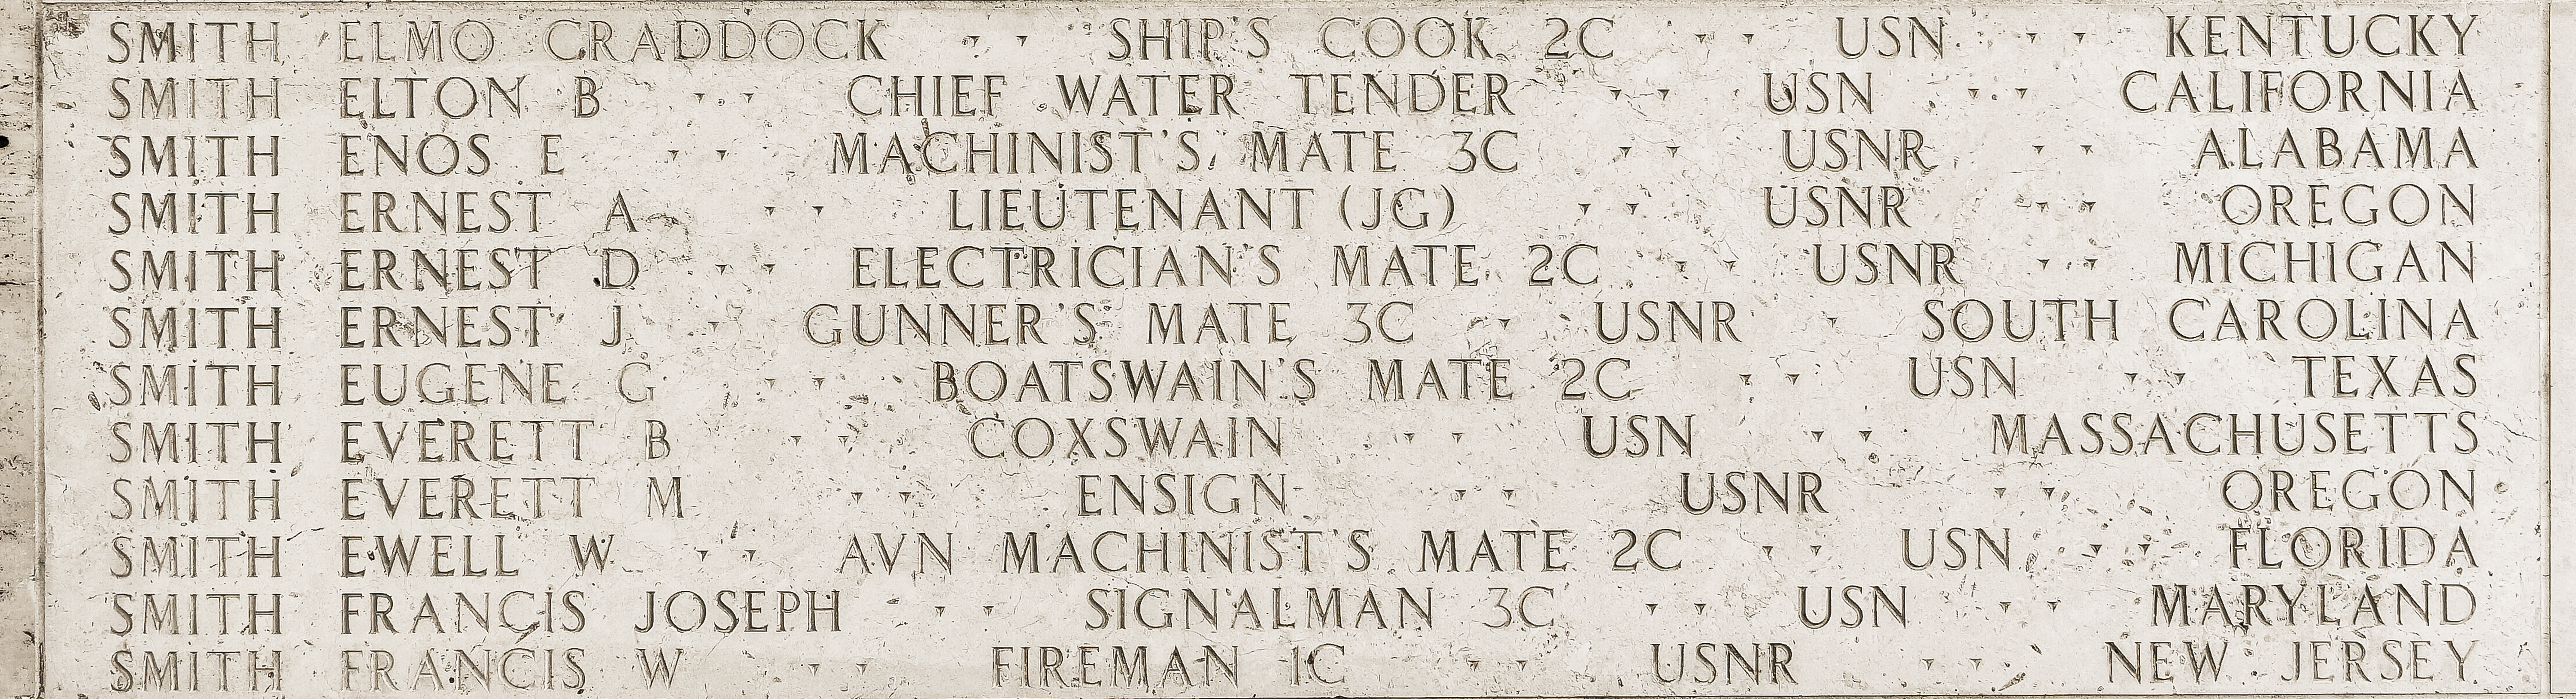 Eugene G. Smith, Boatswain's Mate Second Class